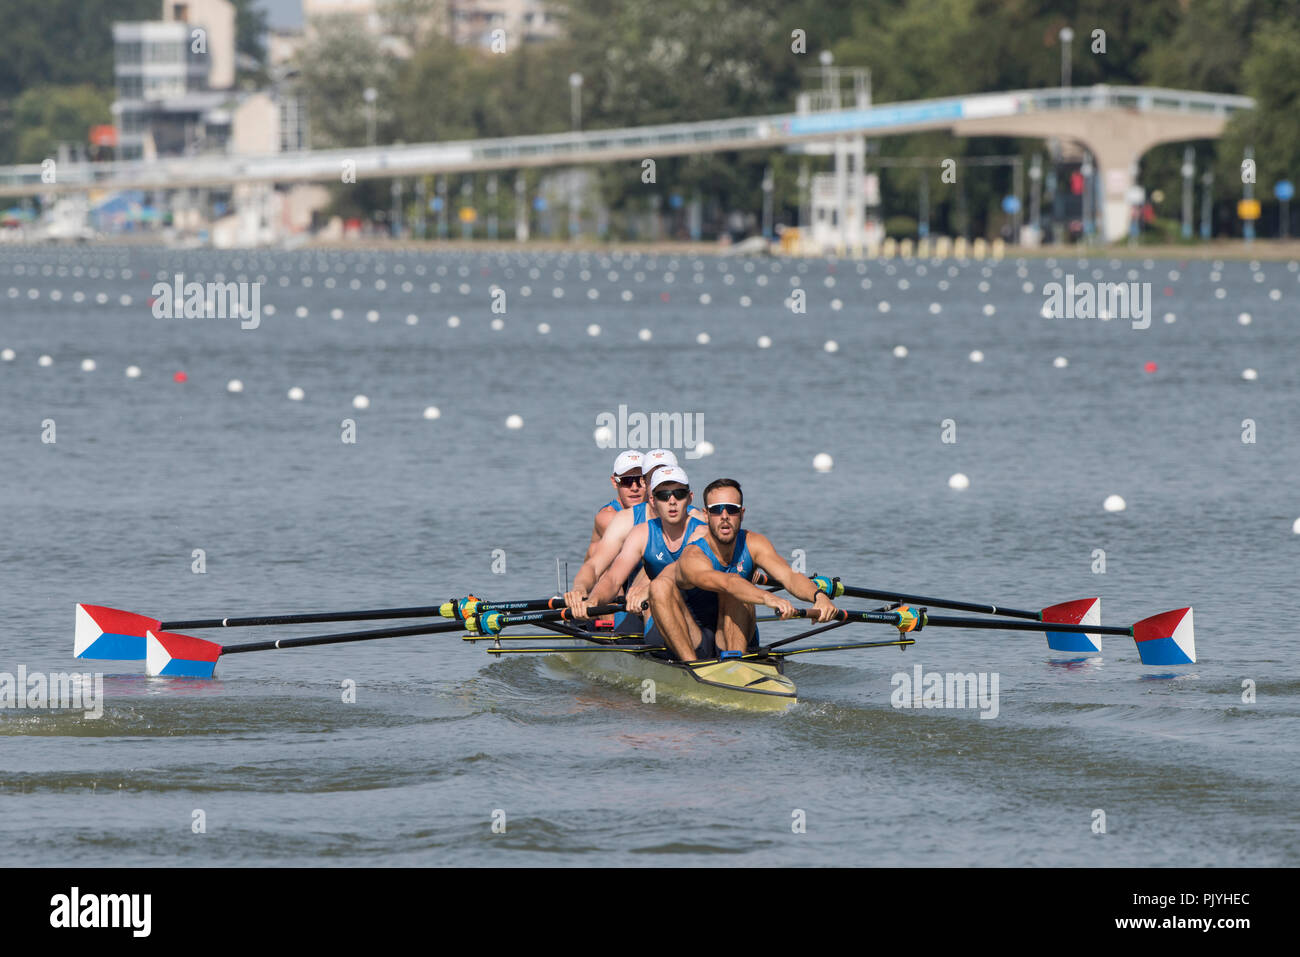 Plovdiv, Bulgaria, Sunday, 9th September 2018. FISA, World Rowing Championships, USA, M4-,  Bow, Alexander RICHARDS, Clougher MICHAEL, Nicholas MEAD and Dan AGHAI, Start of a heat  of the  Men's Four,  © Peter SPURRIER, Alamy Live  News, Stock Photo